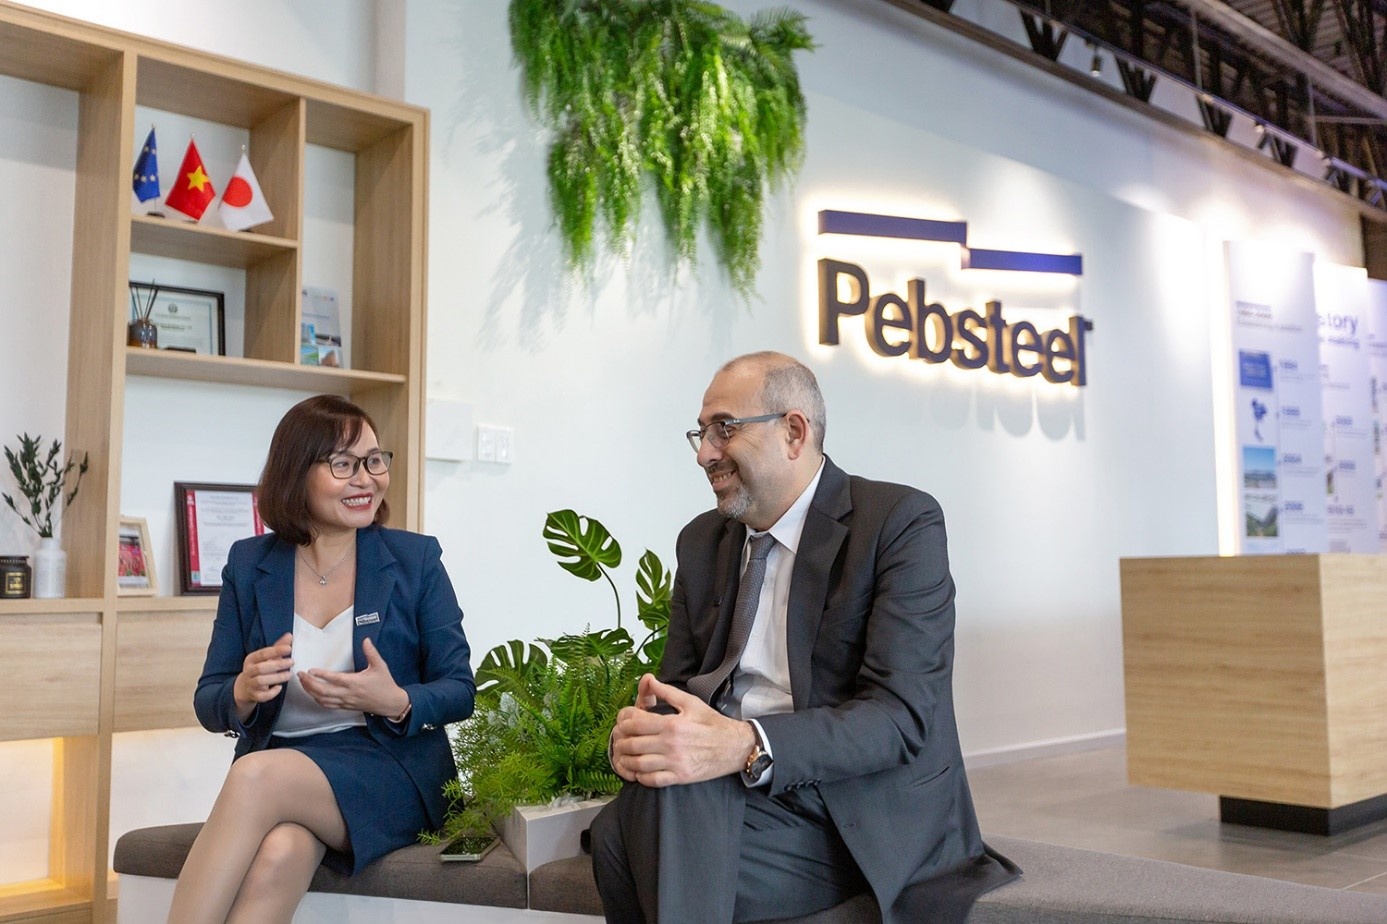 Pebsteel marks 29th anniversary with optimism for future